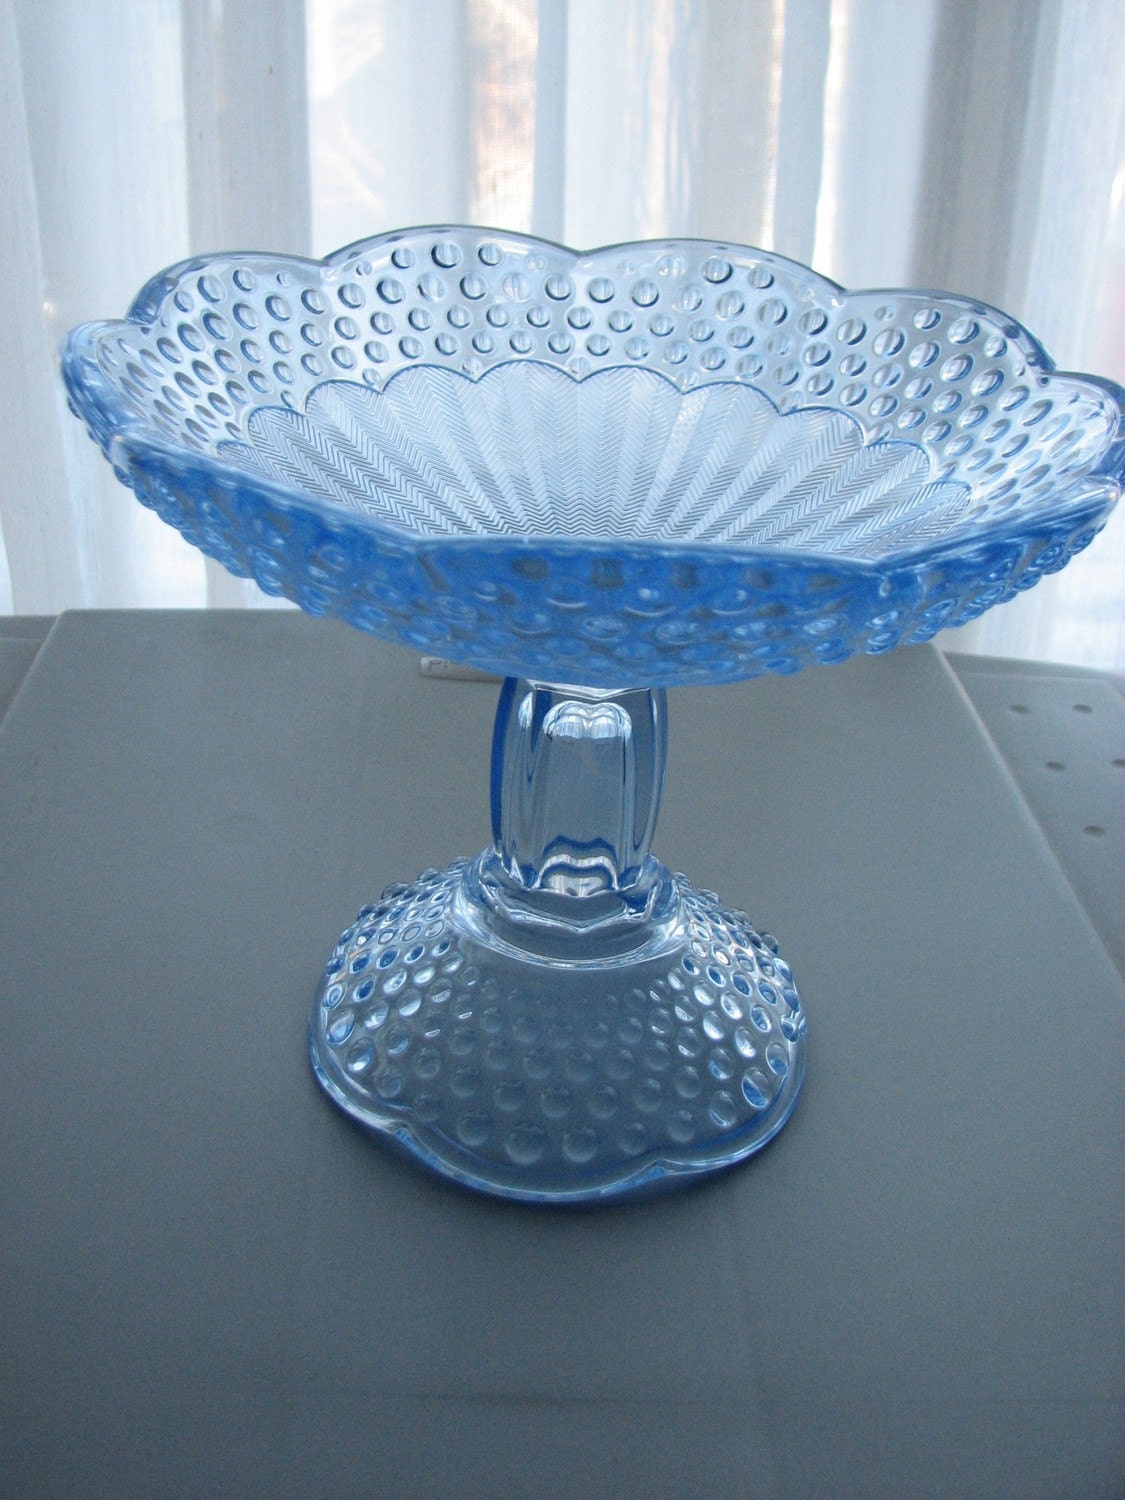 Clearance item...Vintage Emily's Attic by Gorham Blue Glass Compote Bowl